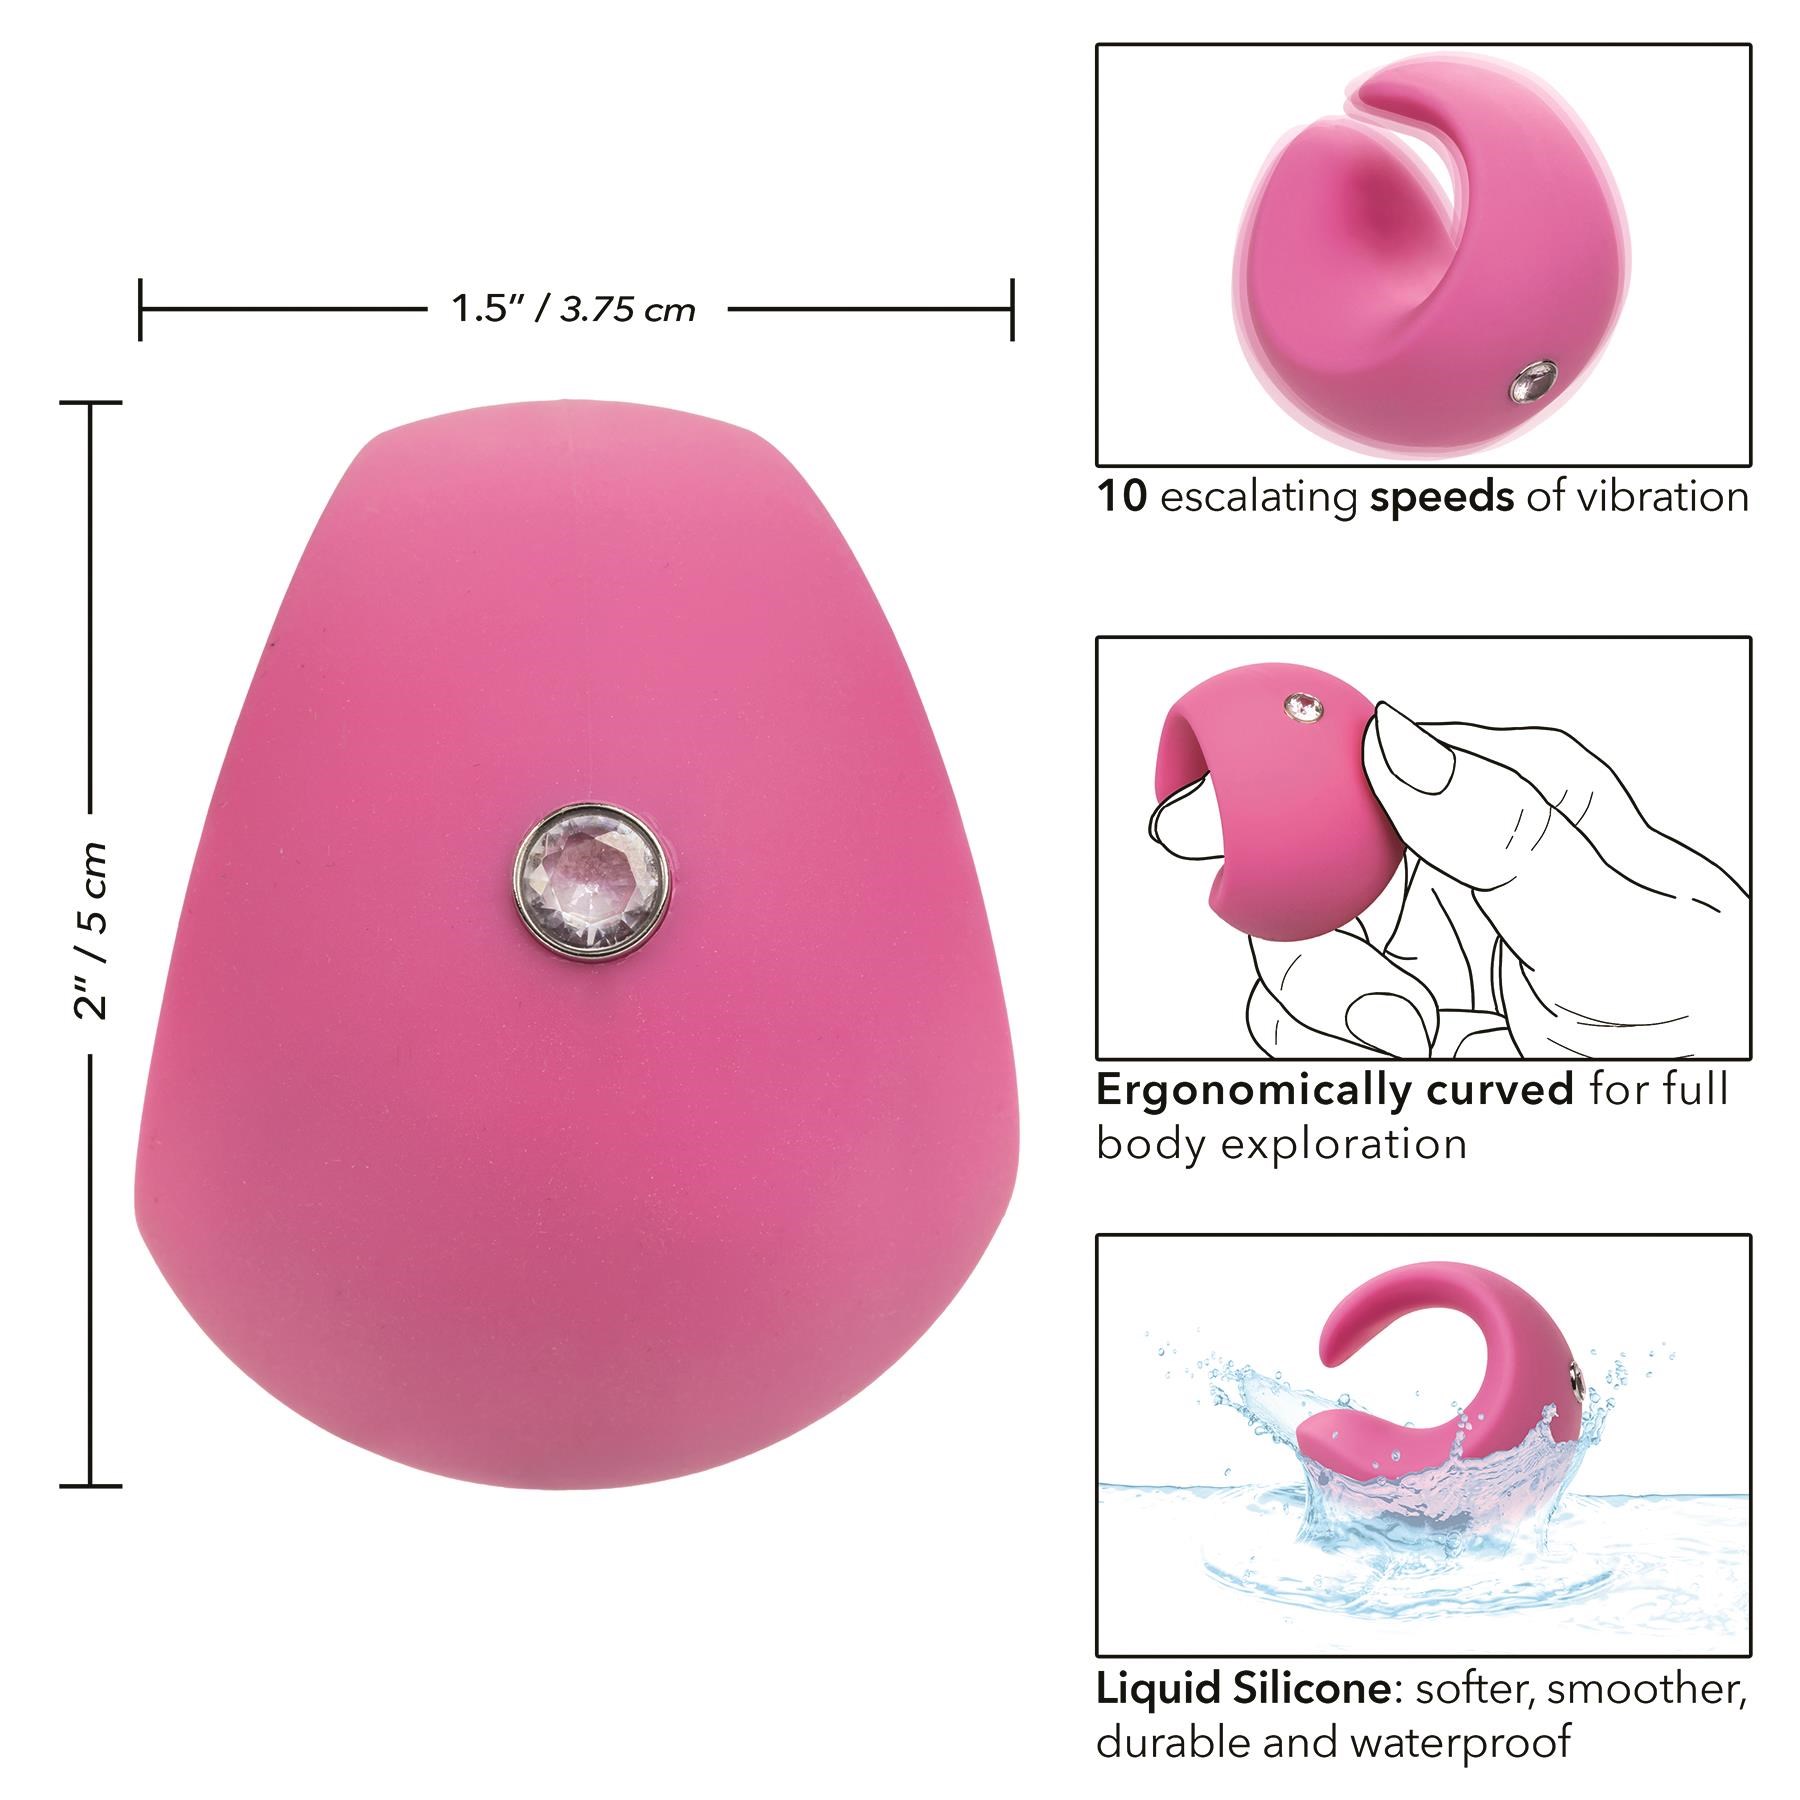 Luvmor "O"s Finger Vibrator - Dimensions and Instructions